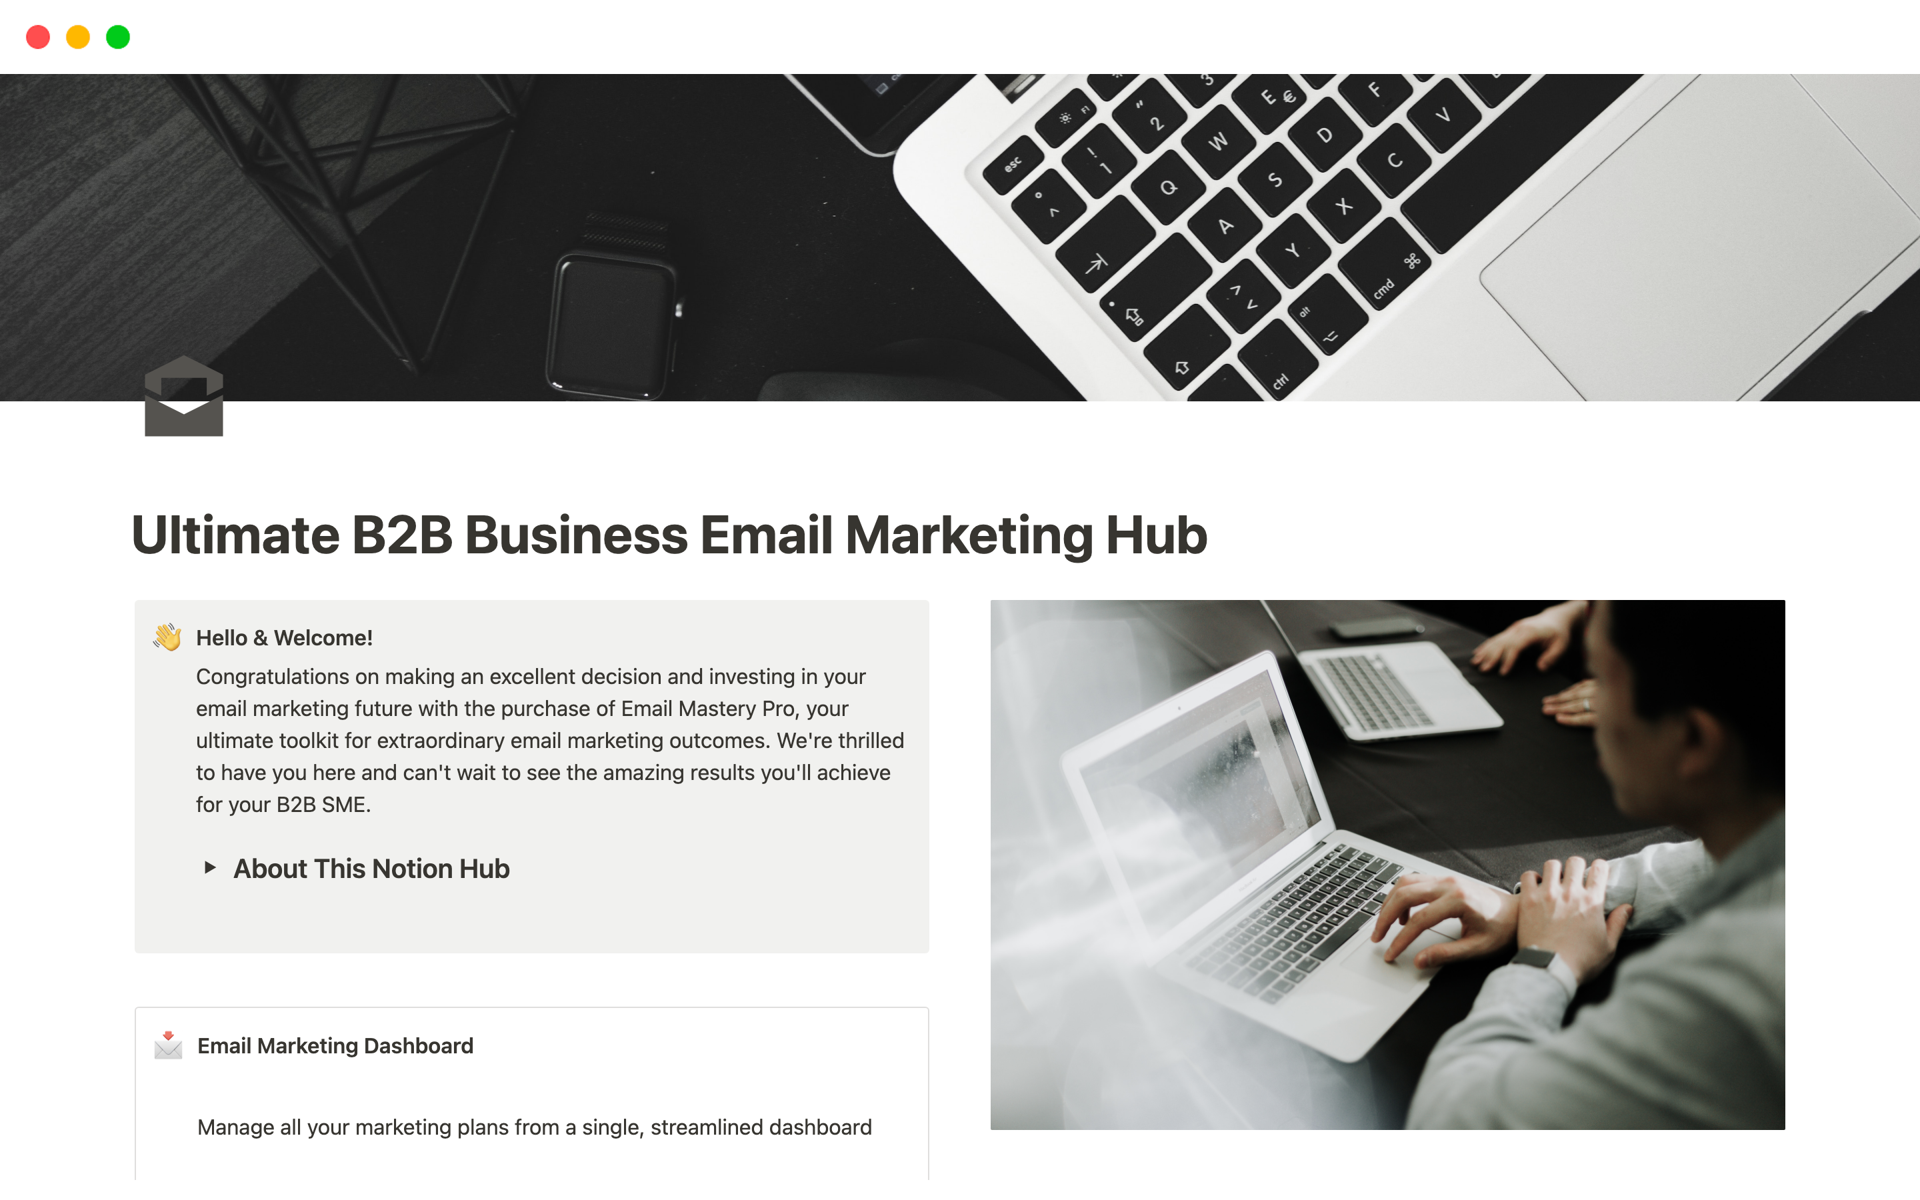 Boost your B2B SME's email marketing with our all-inclusive Notion hub, featuring expert templates, real-world examples, and effective planning tools.

